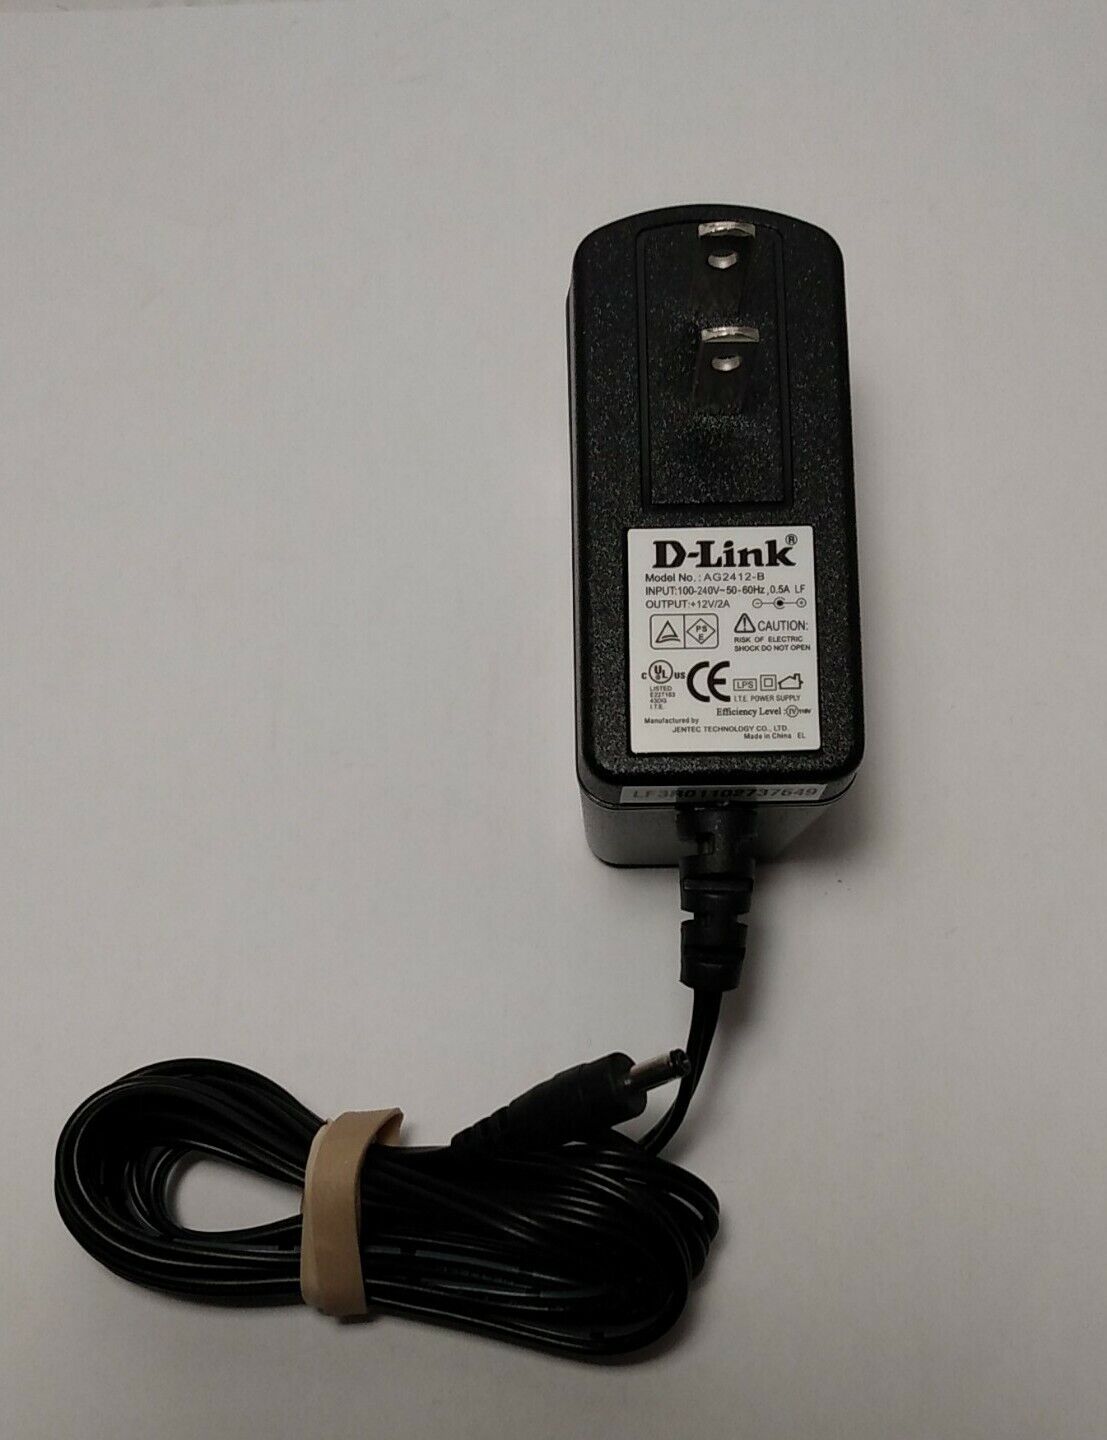 Genuine D-Link JENTEC AG2412-B AC/DC Power Supply Adapter Output 12V 2A (Tested) Brand: JECTEC Type: AC/DC Adapter - Click Image to Close